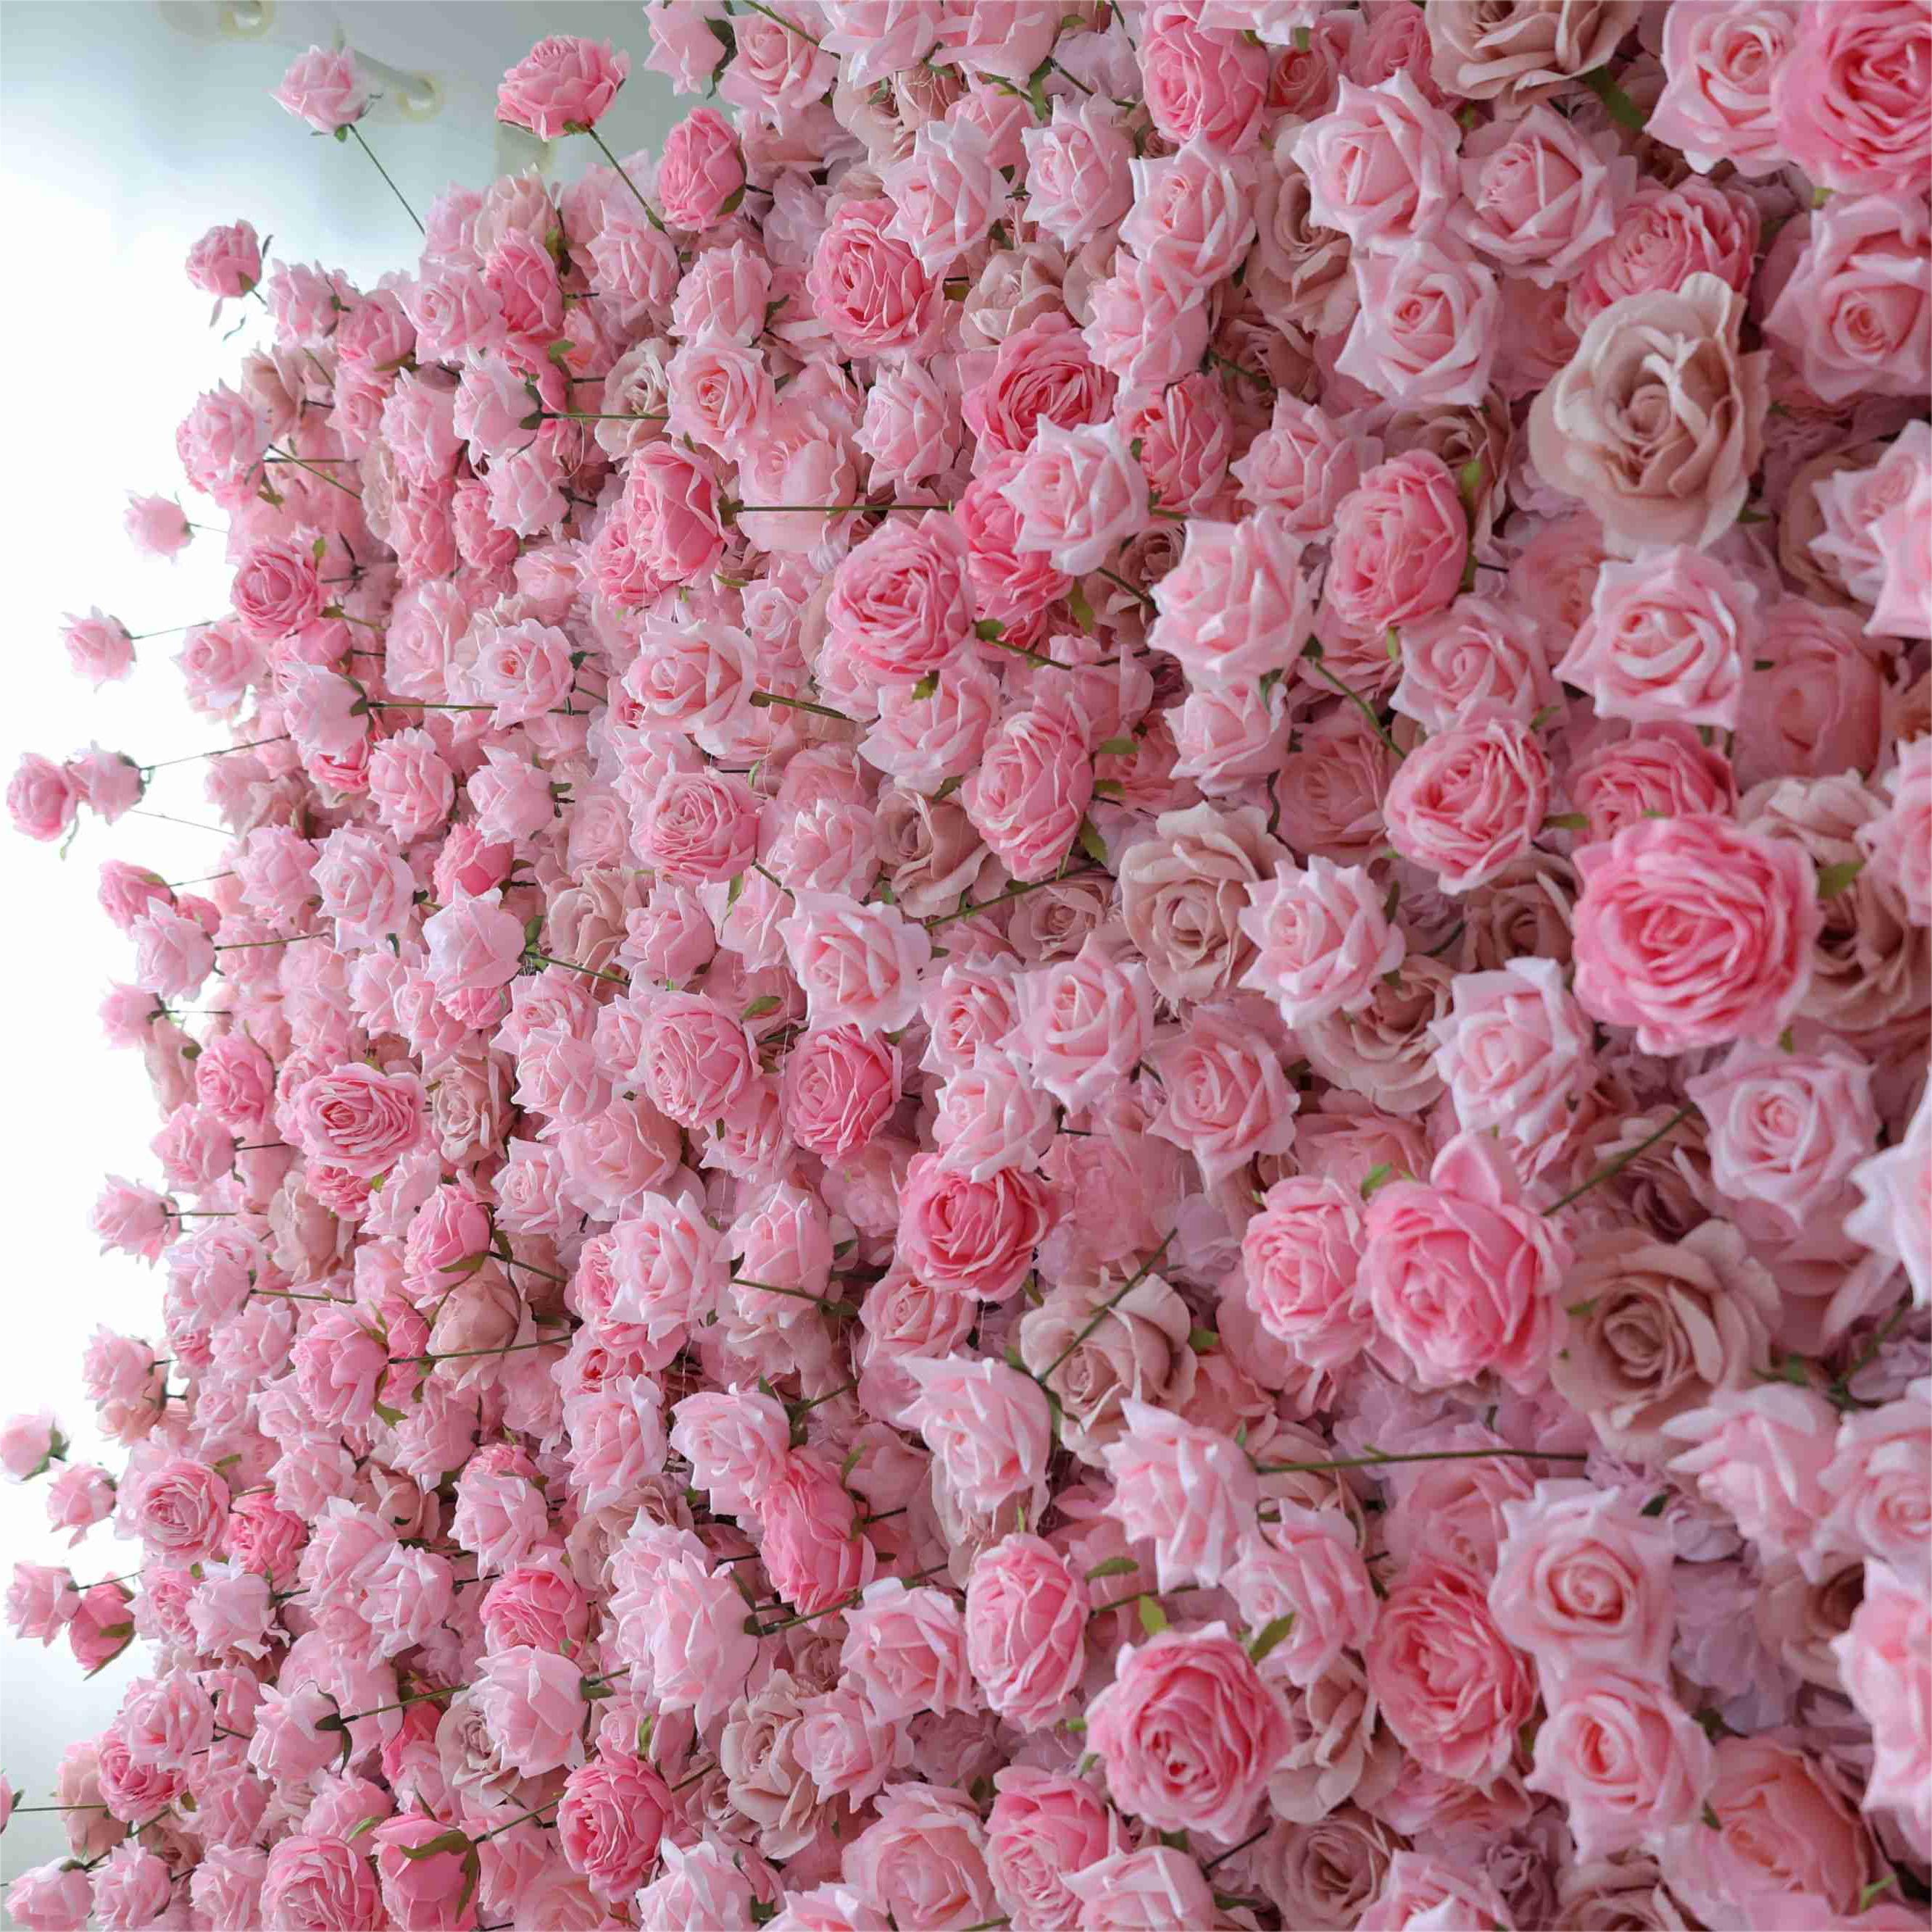 Flower Wall Pink Fabric Rolling Up Curtain Floral Backdrop Wedding Party Proposal Decor